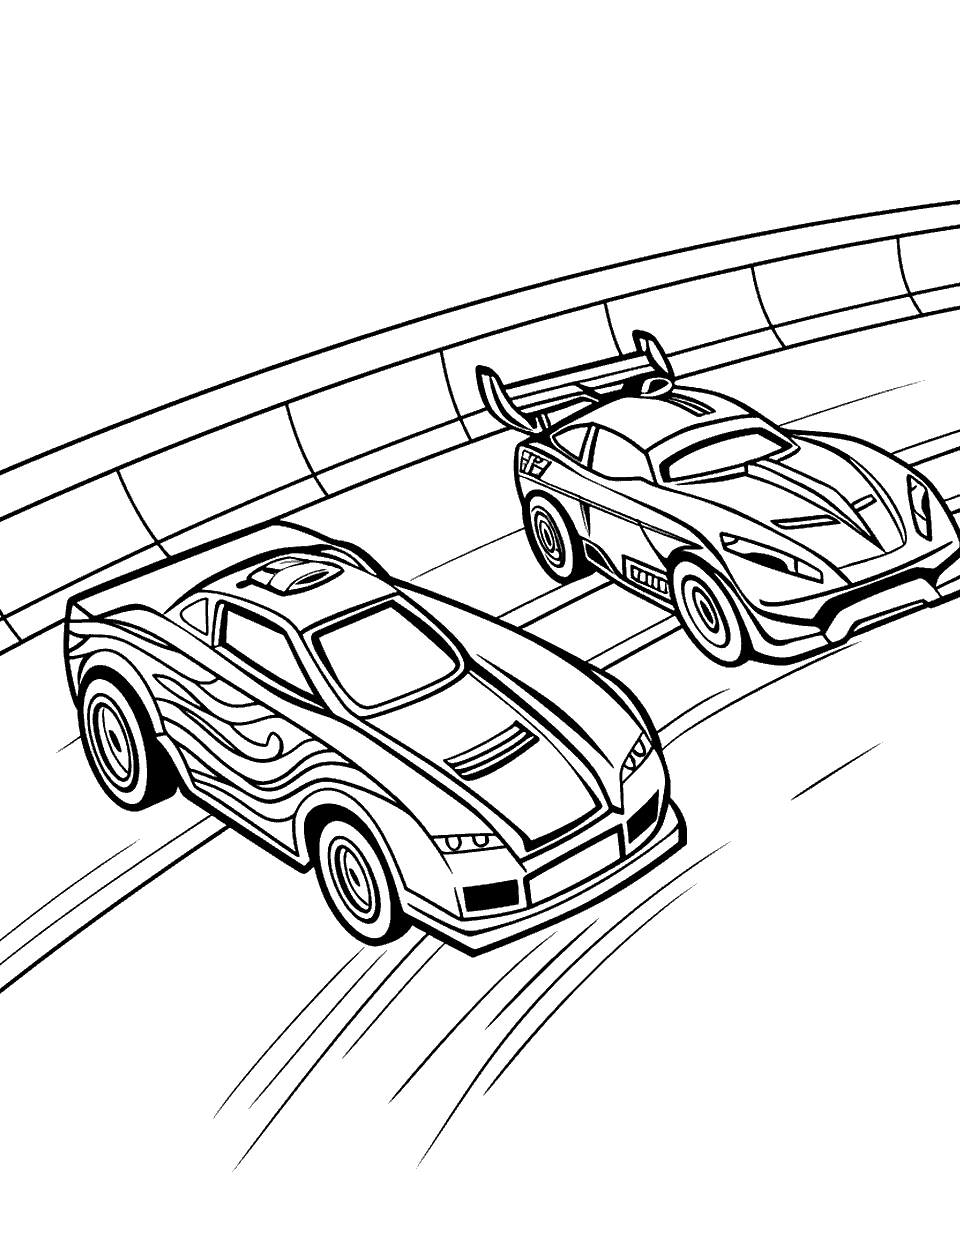 Wheels Race Track Challenge Coloring Page - Two Hot Wheels cars at the starting line of a race track.